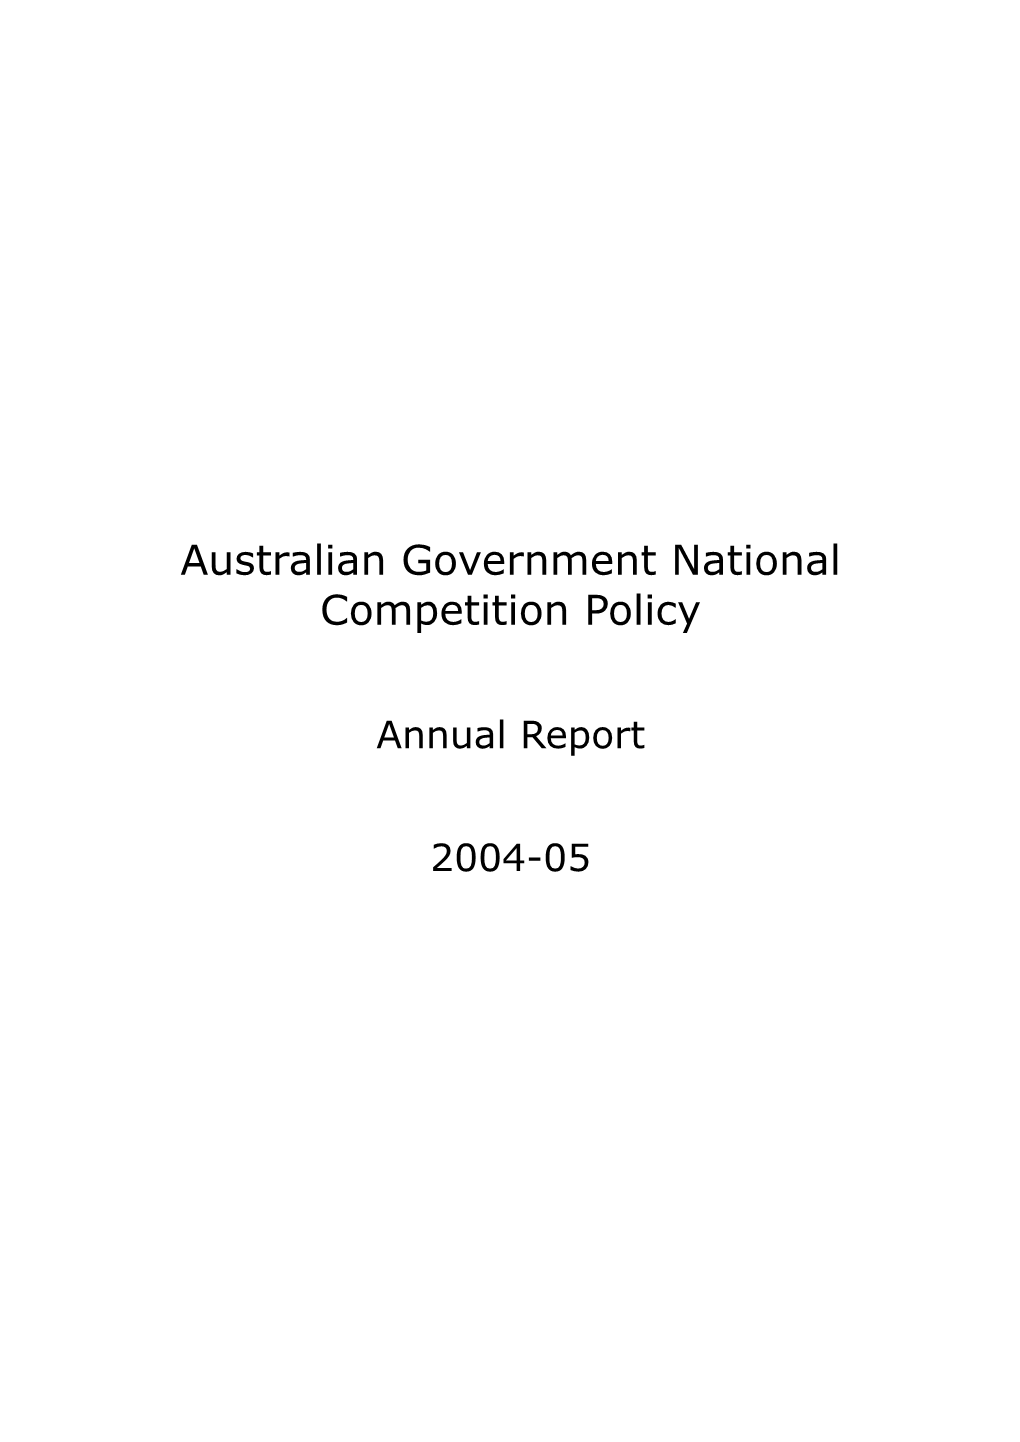 The Australian Government's NCP Annual Report for the Period 1 July